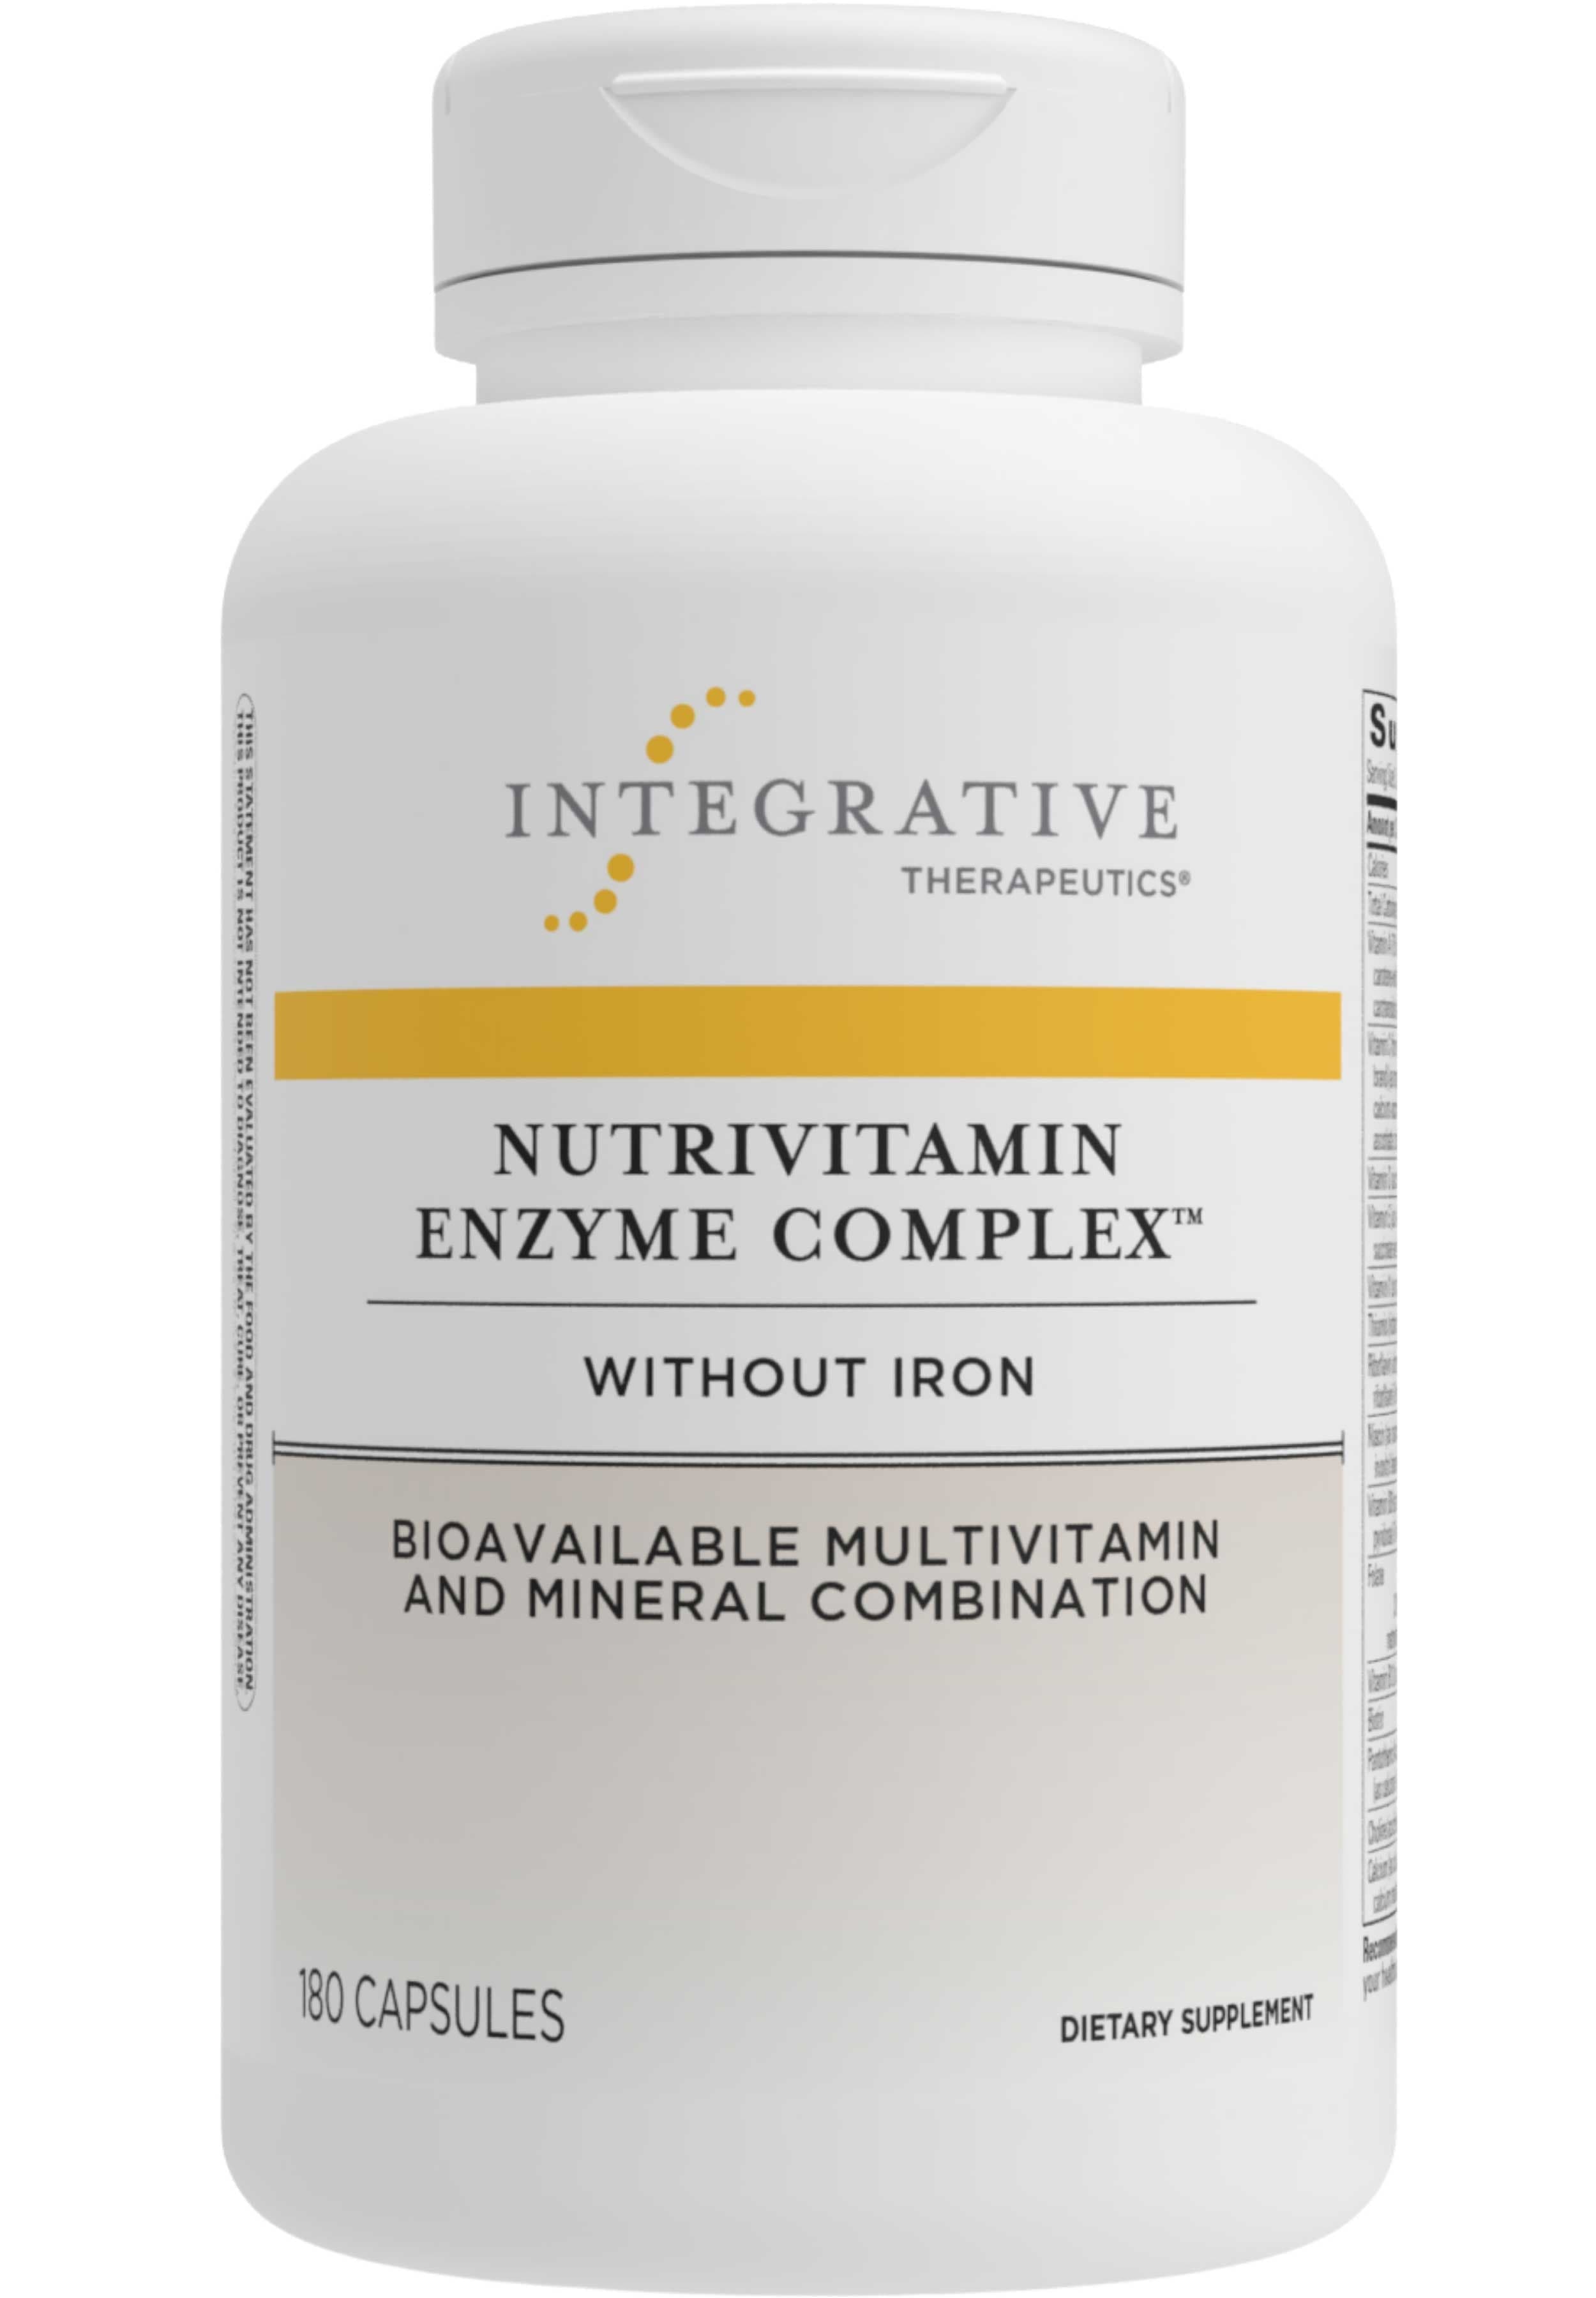 Integrative Therapeutics Nutrivitamin Enzyme Complex without Iron